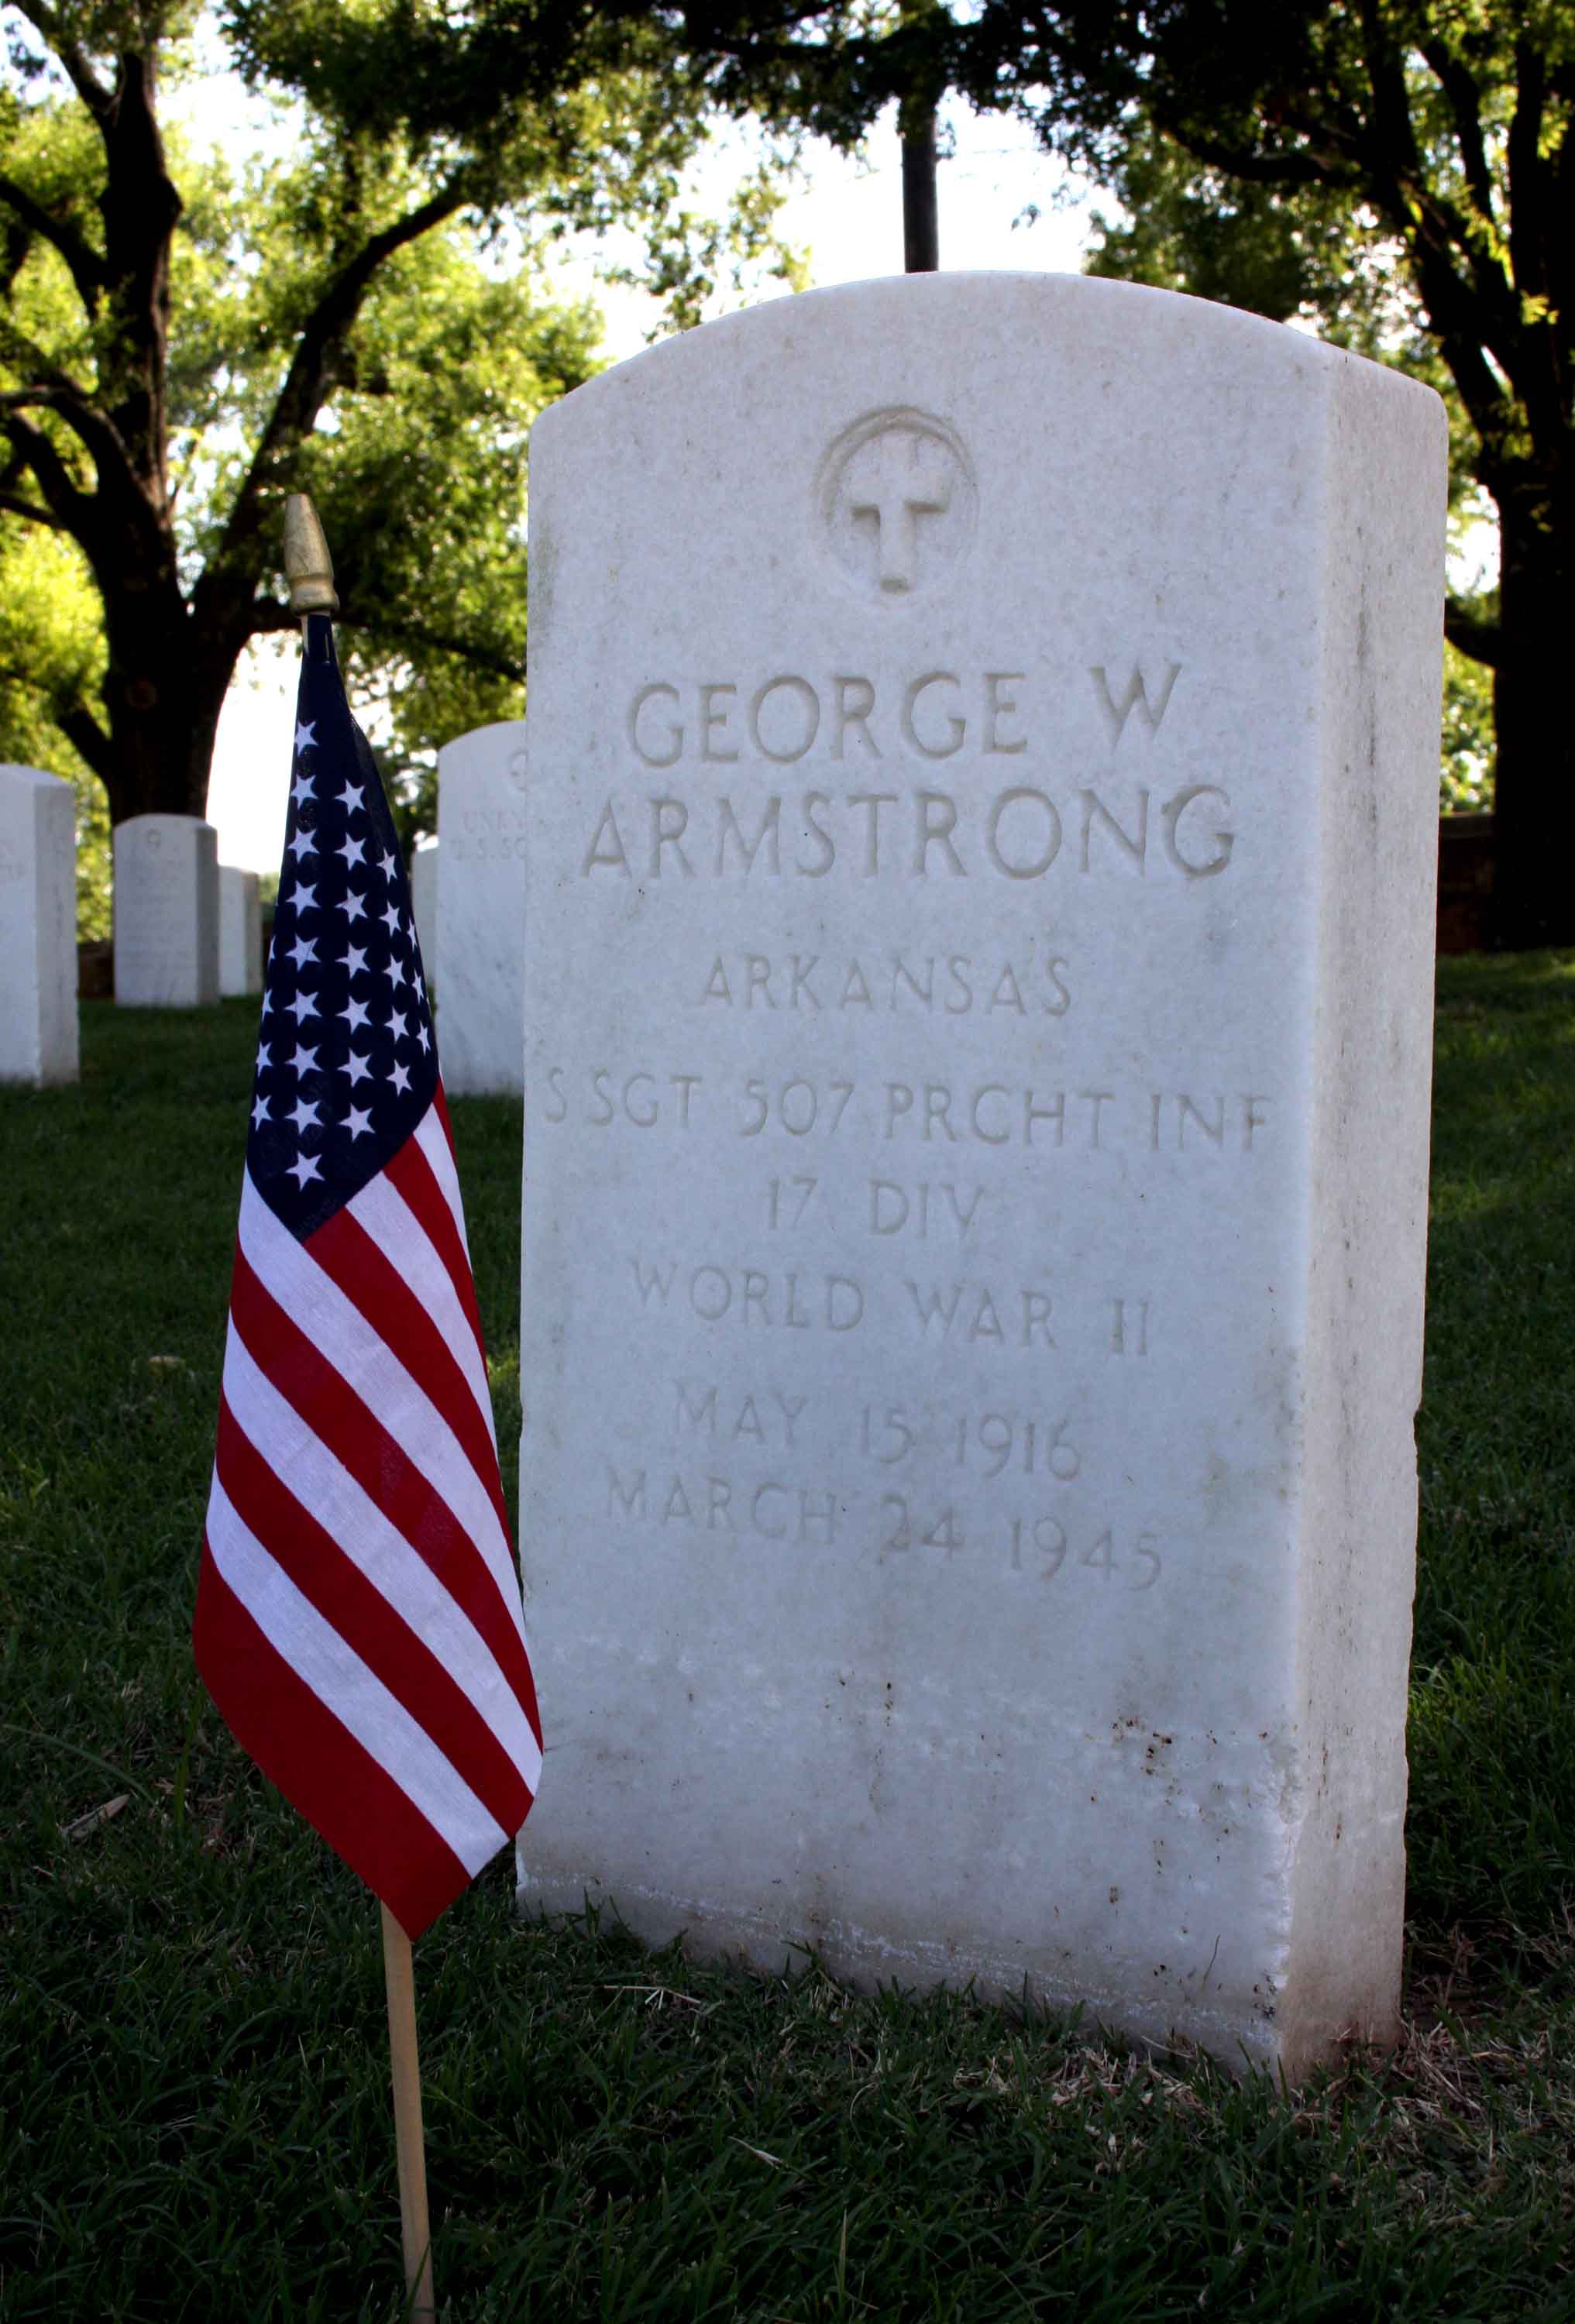 G. Armstrong (Grave)